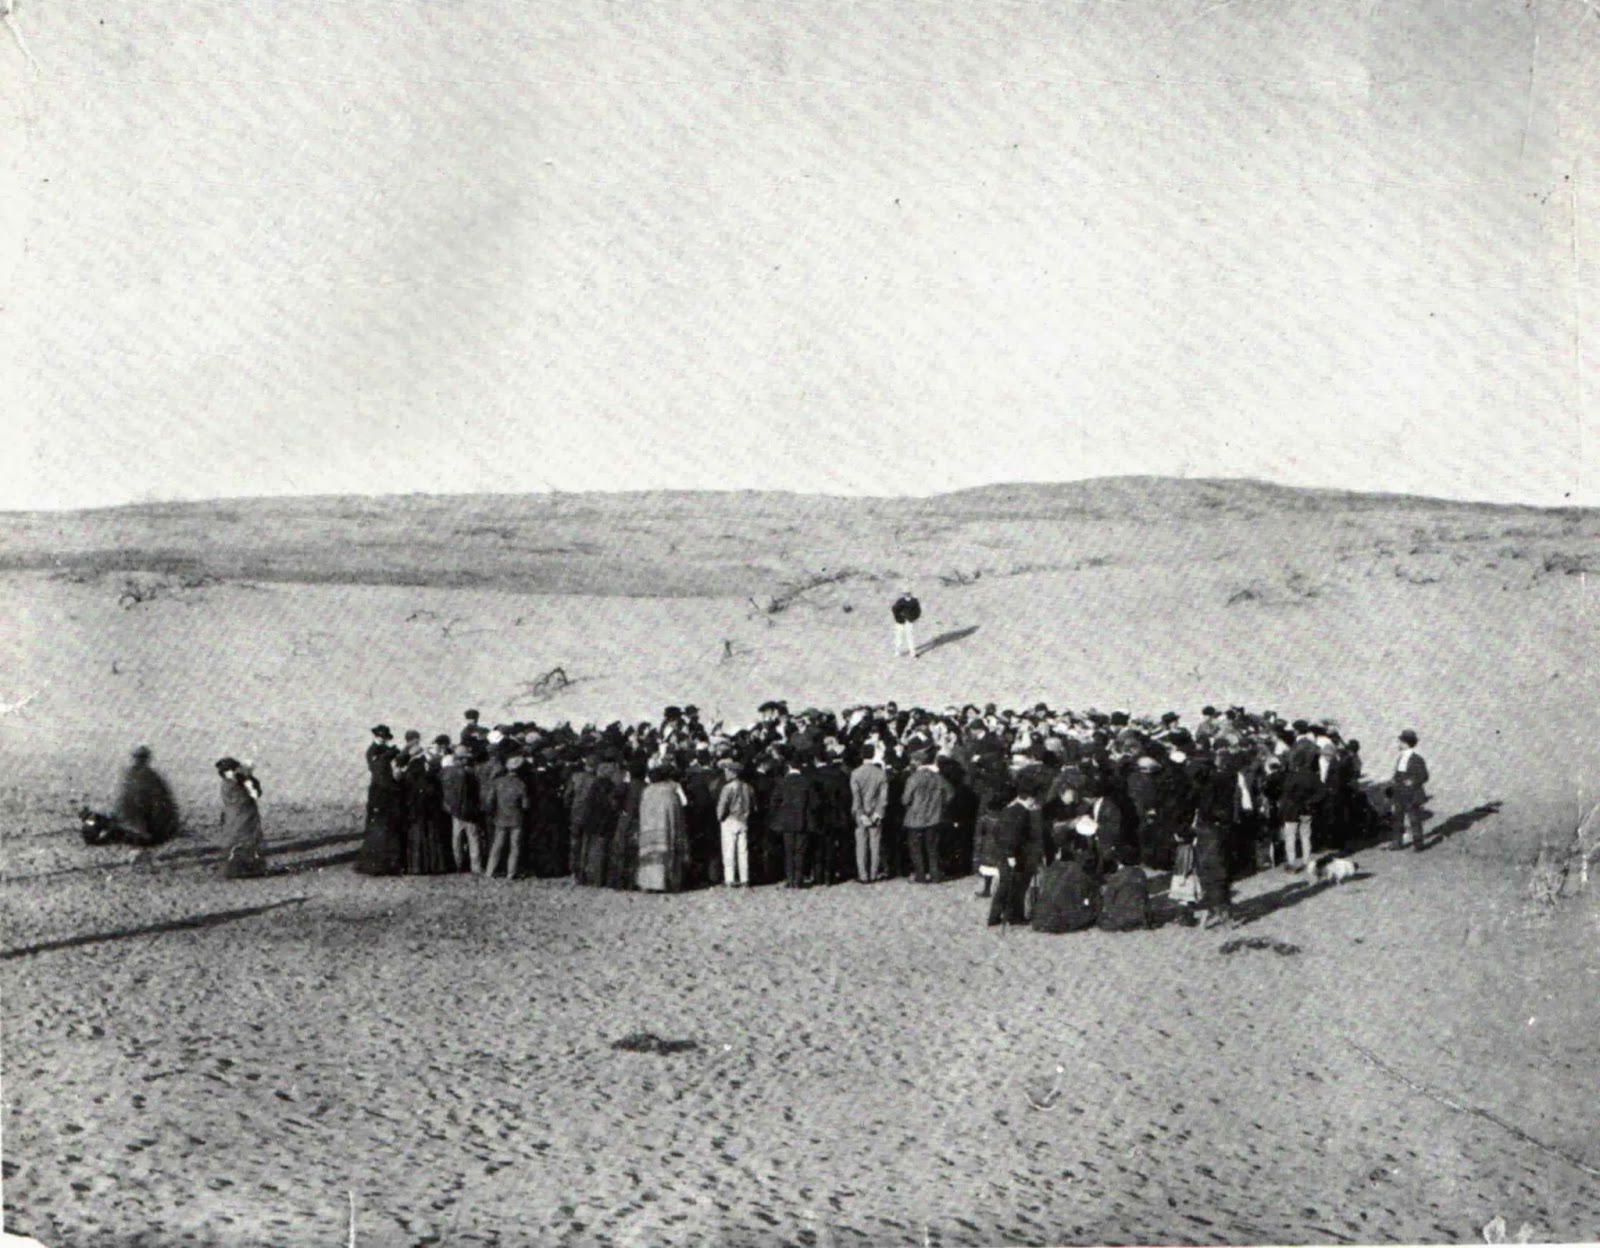 About+100+people+participate+in+a+lottery+to+divide+a+12-acre+plot+of+sand+dunes,+that+would+later+become+the+city+of+Tel+Aviv,+1909.jpg